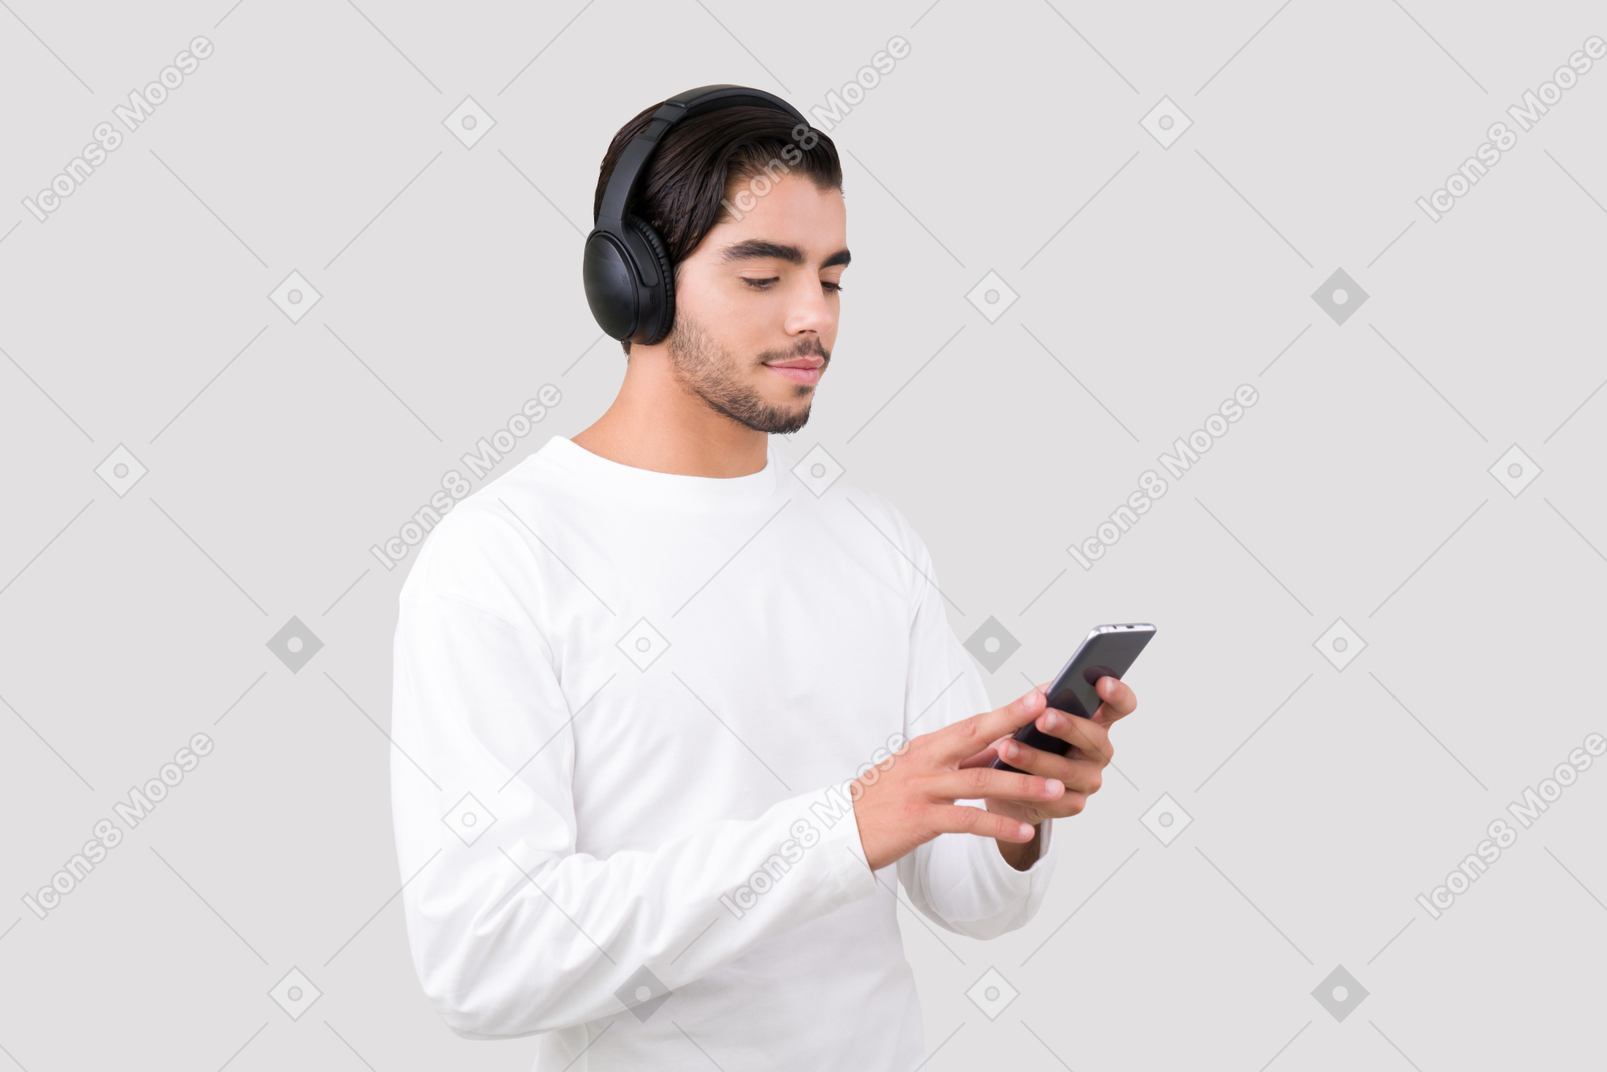 Choosing the best music for his morning run